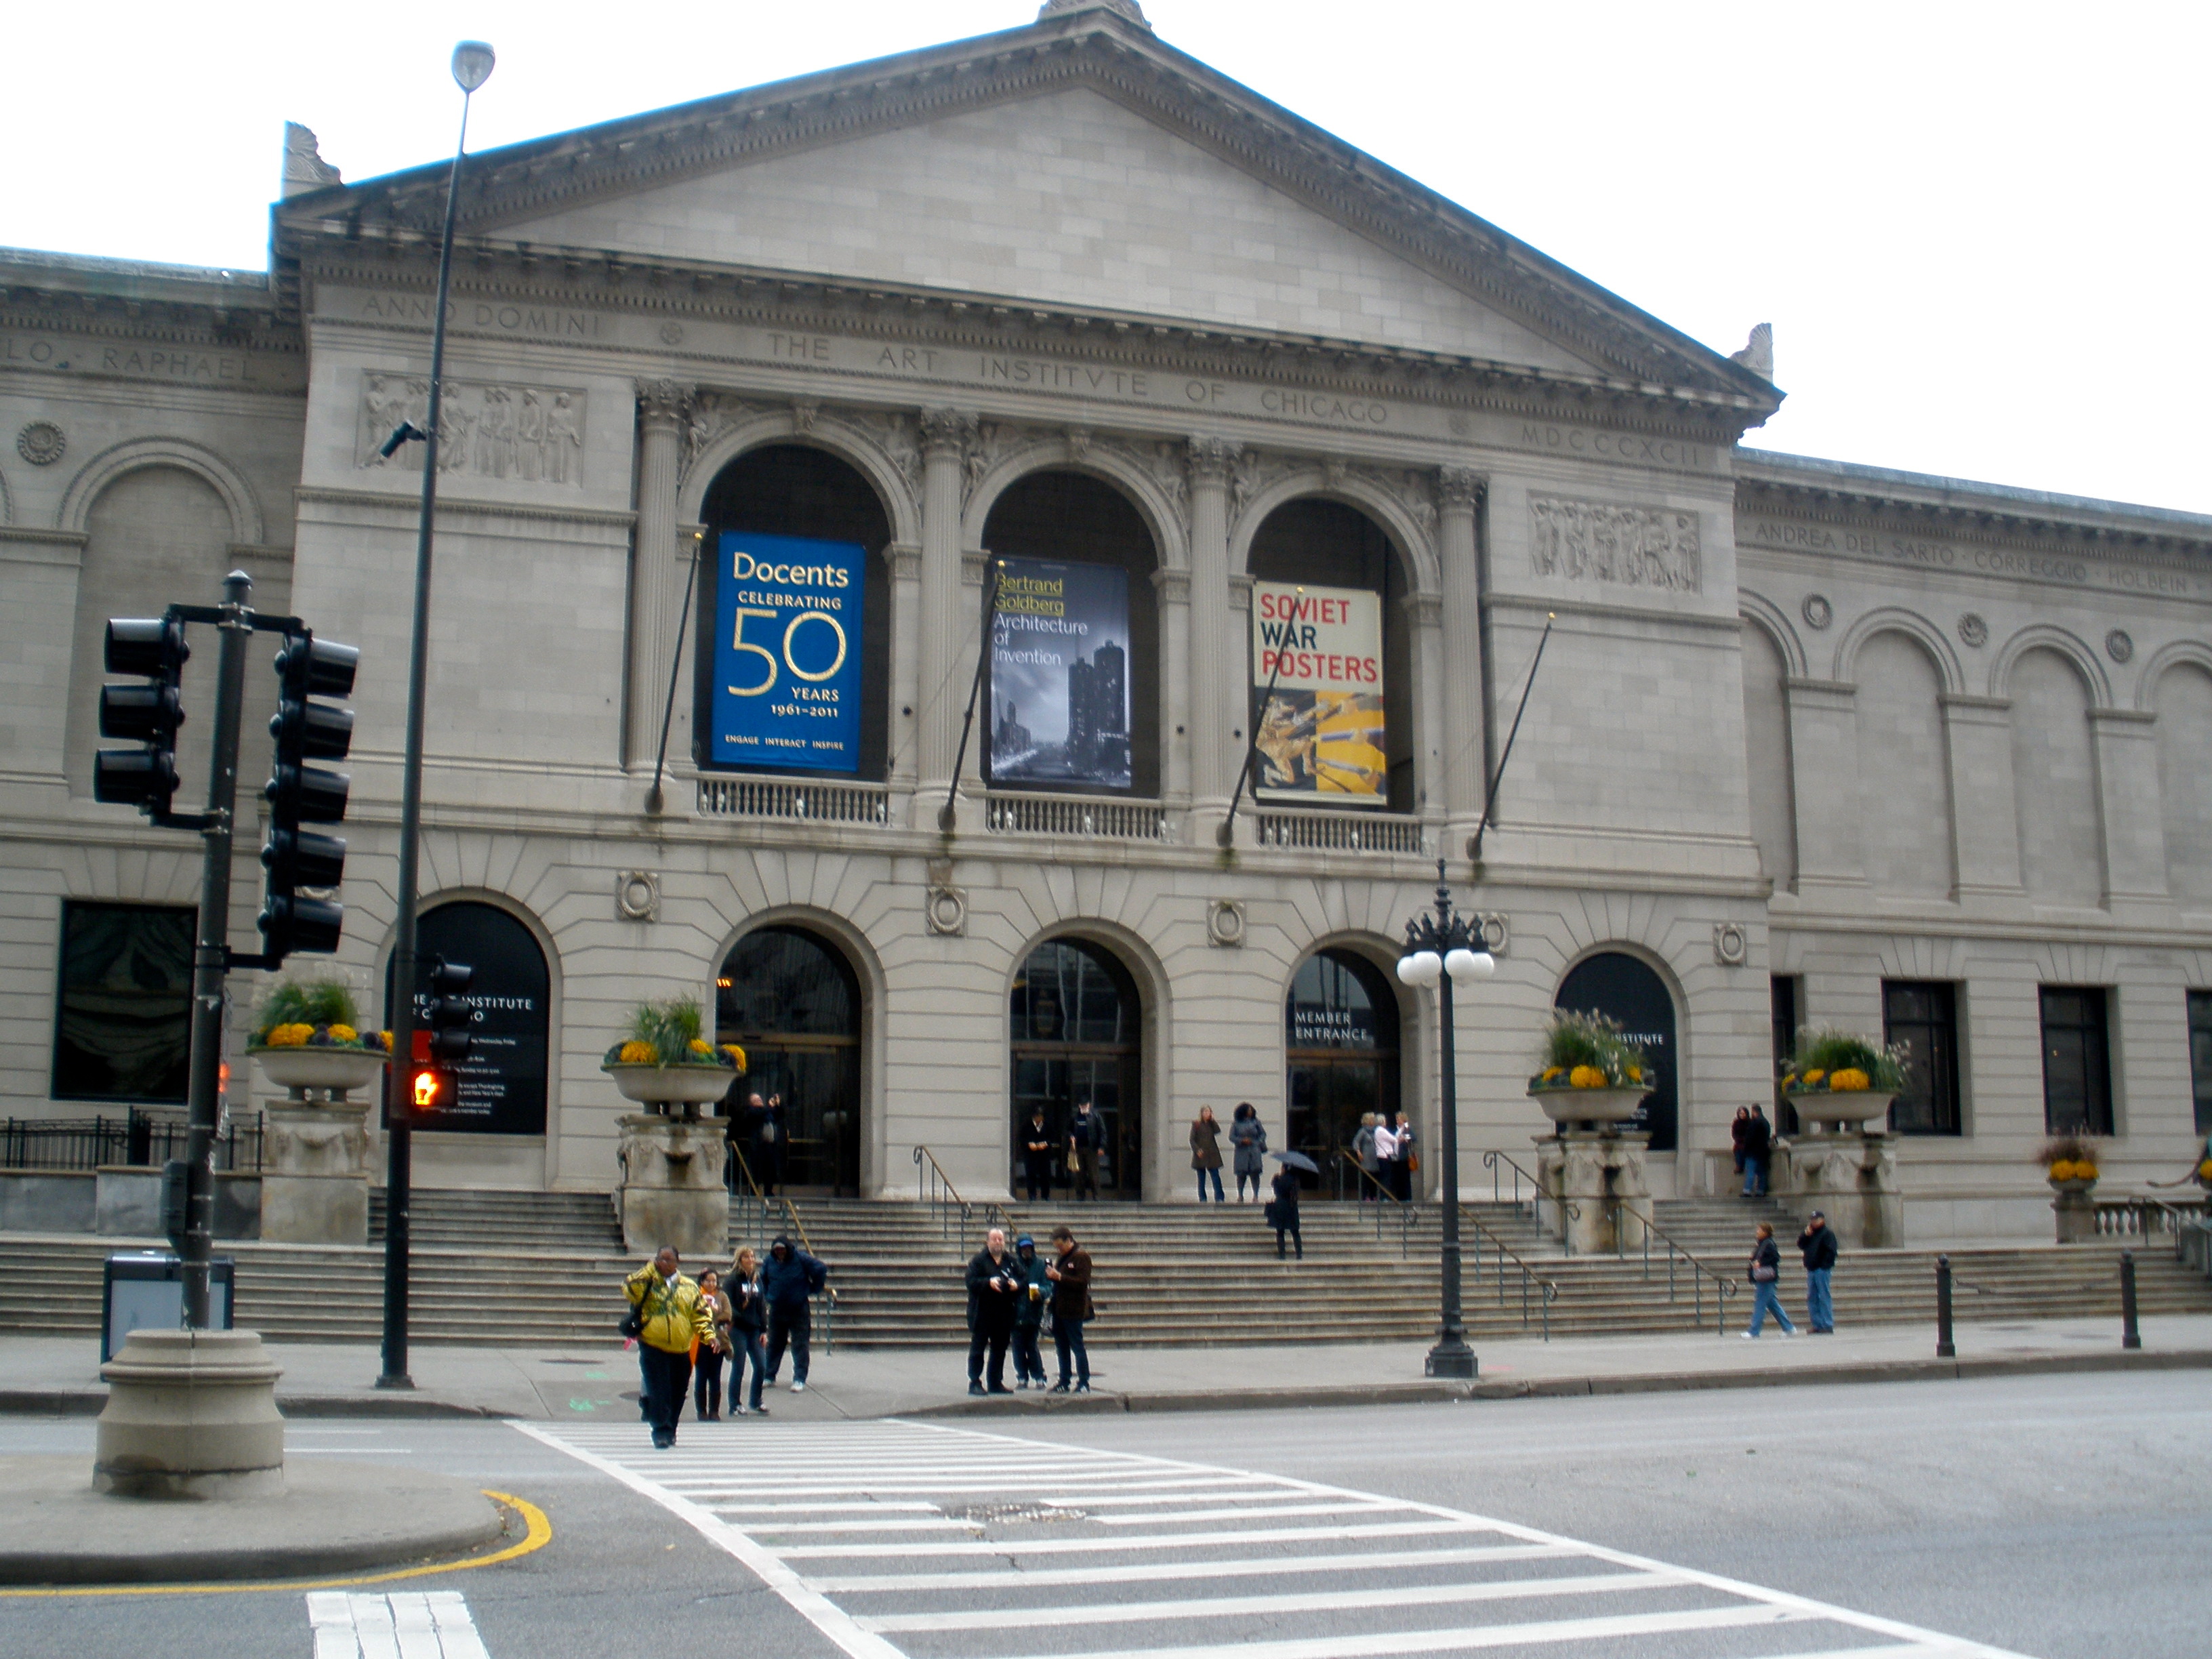 The Art Institute of Chicago chooses Preservica to 